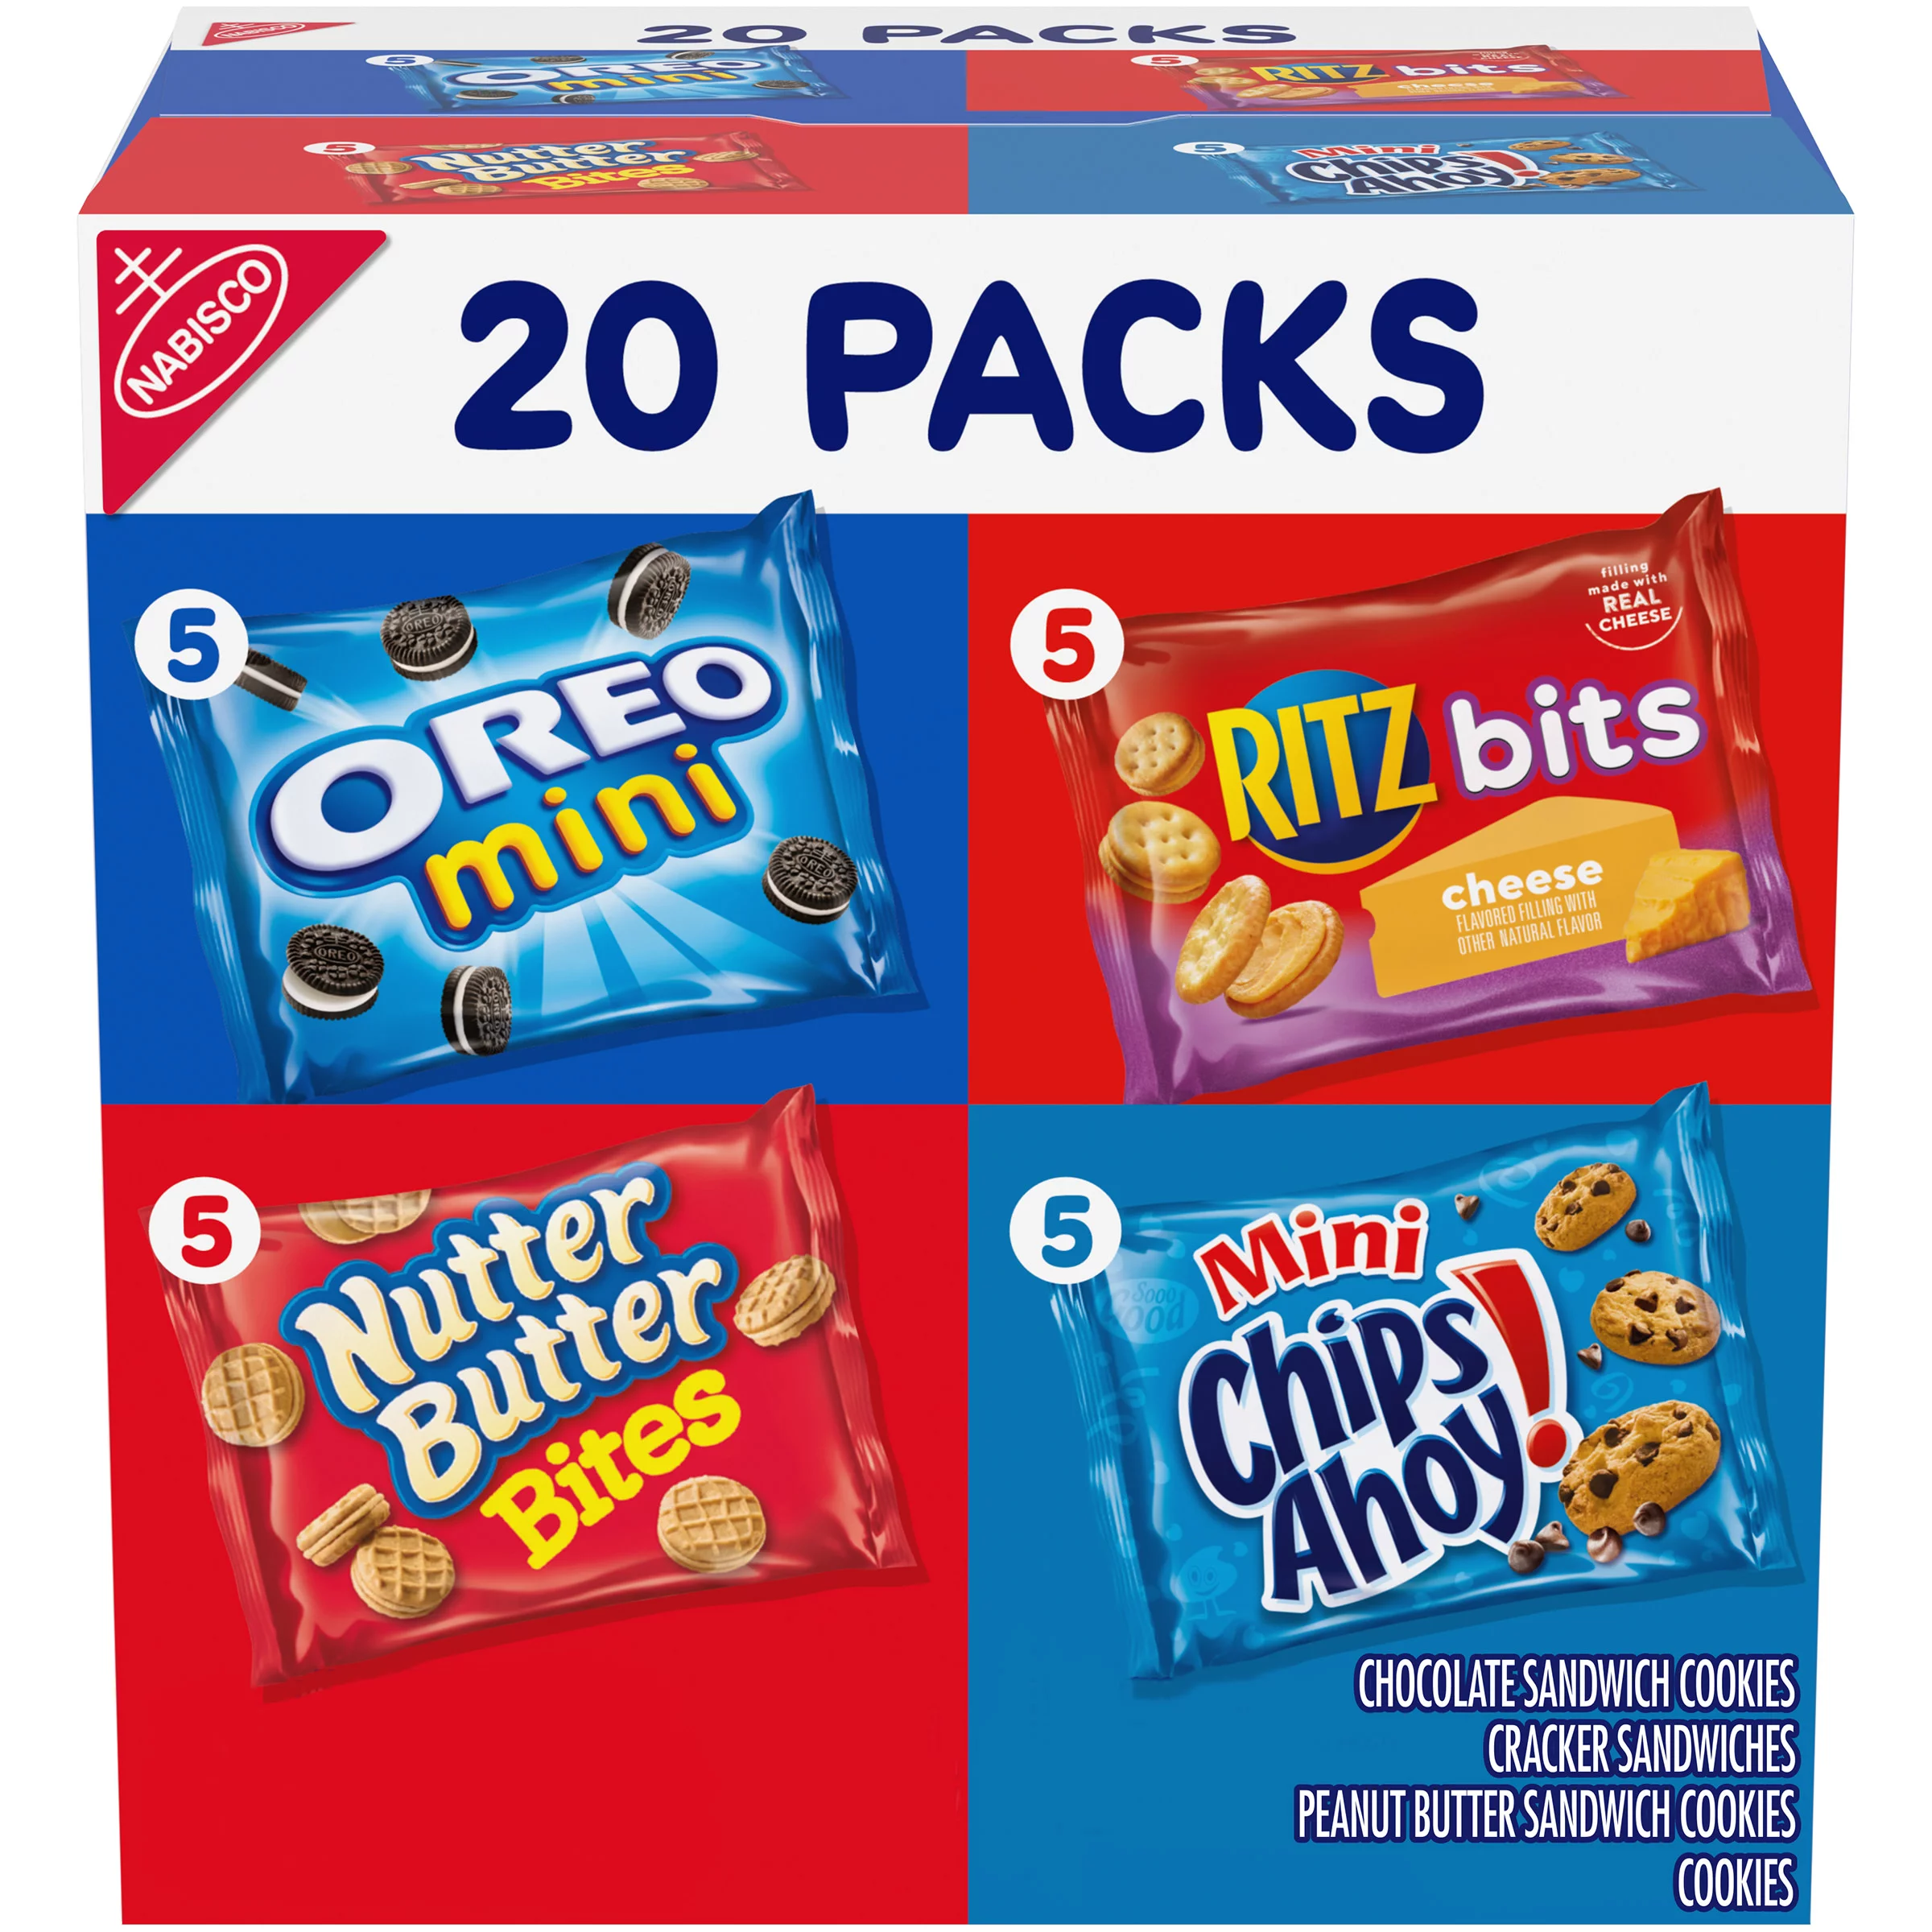 Nabisco Classic Mix Variety Pack, OREO, CHIPS AHOY!, Nutter Butter Bites, RITZ Bits, School Snacks, 20 Snack Packs